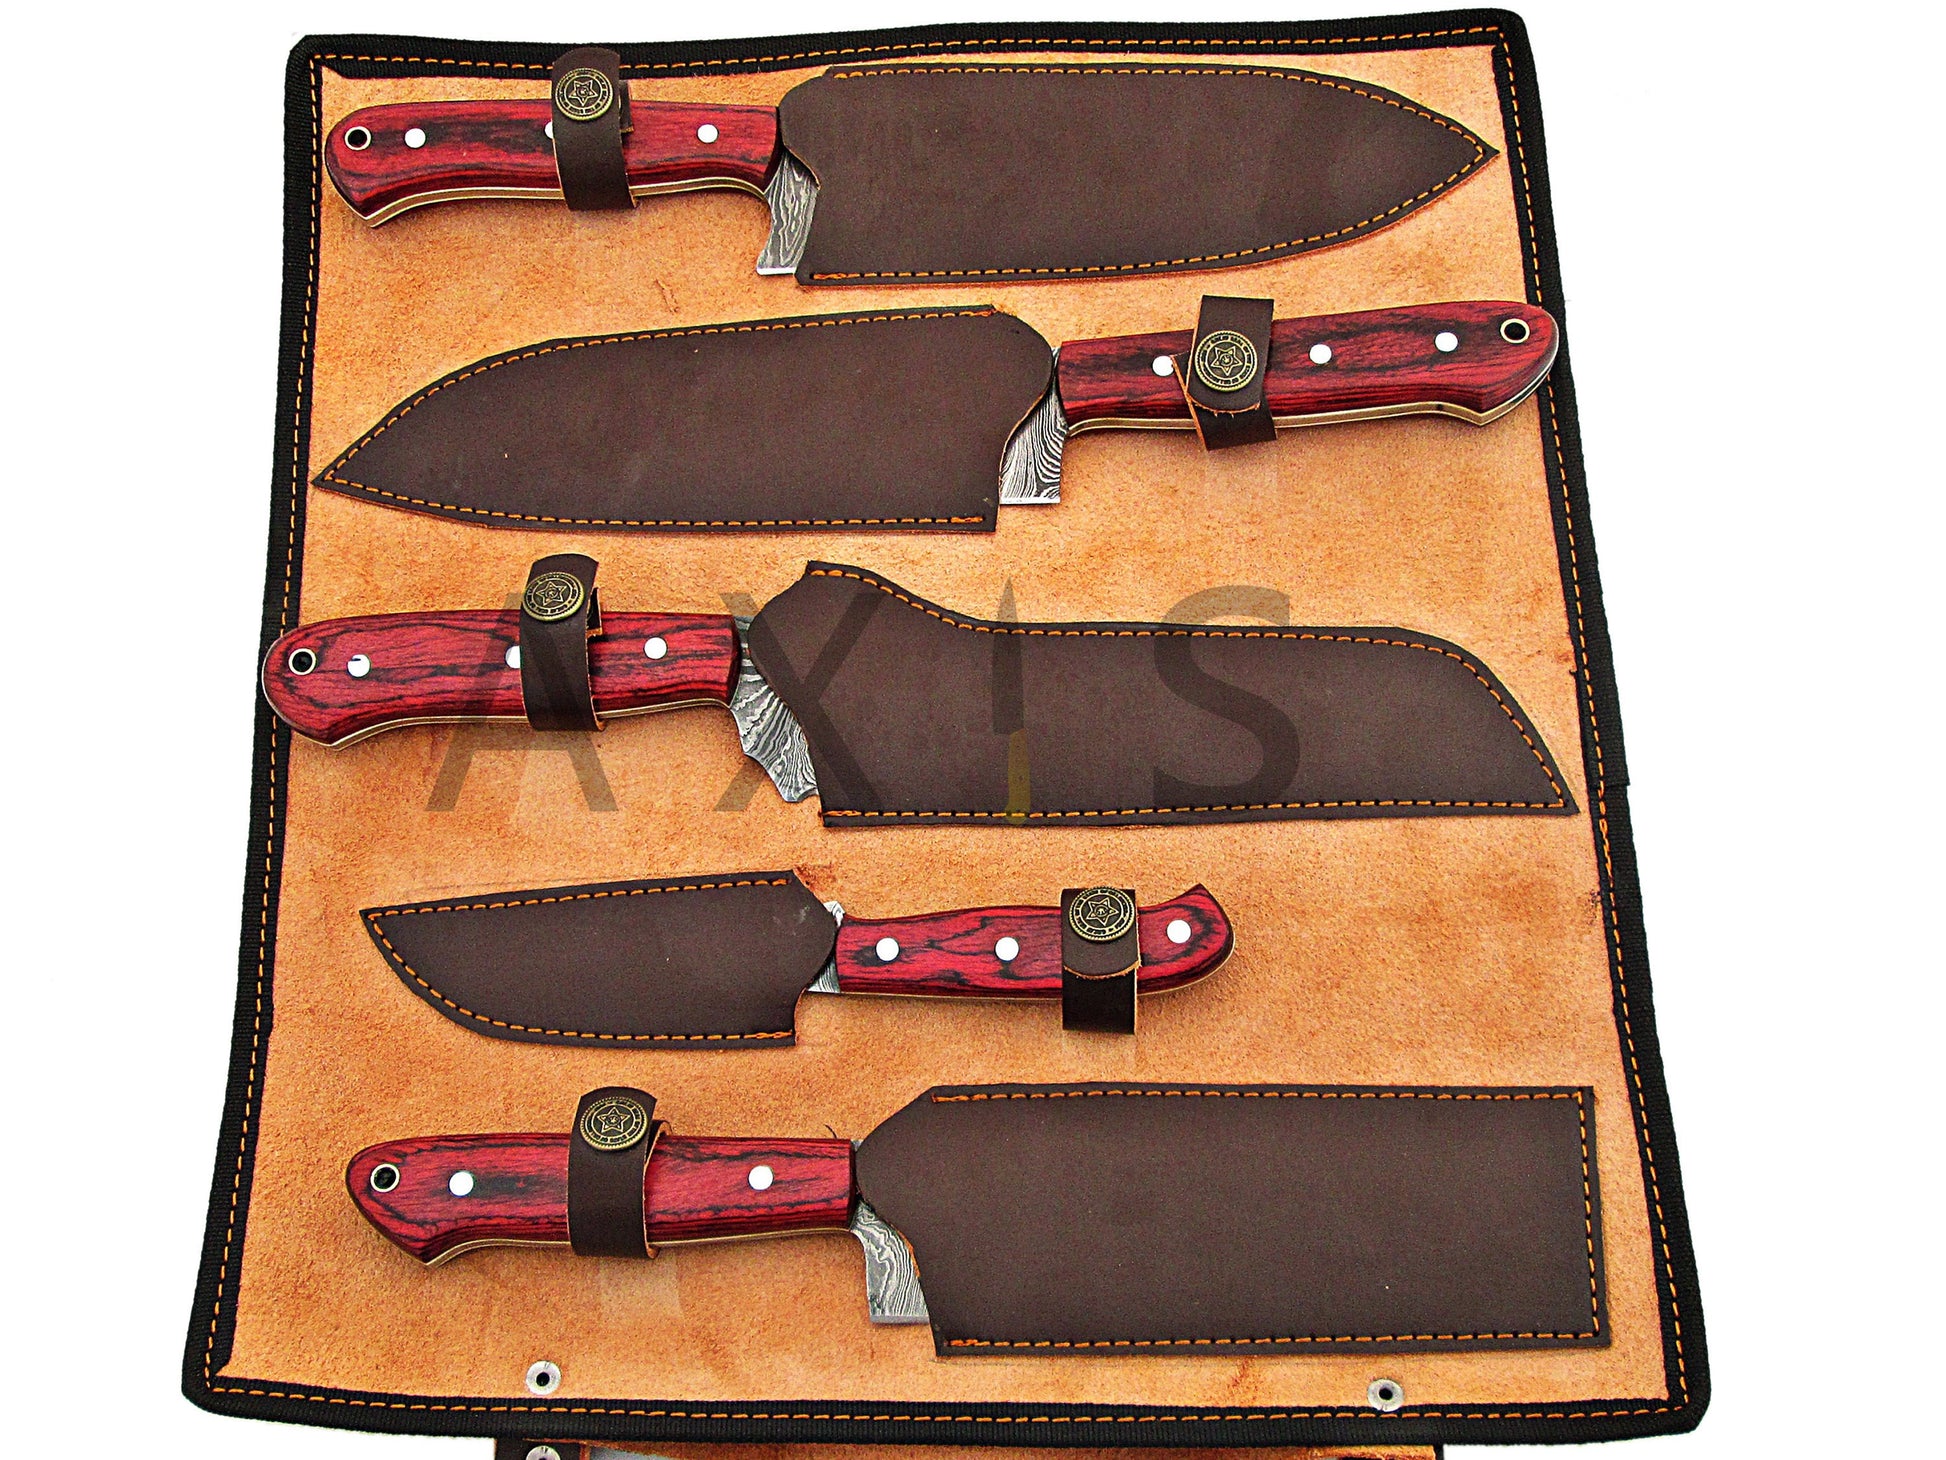 8”pieces Handmade HAND FORGED DAMASCUS STEEL CHEF KNIFE Set KITCHEN Knives  SET